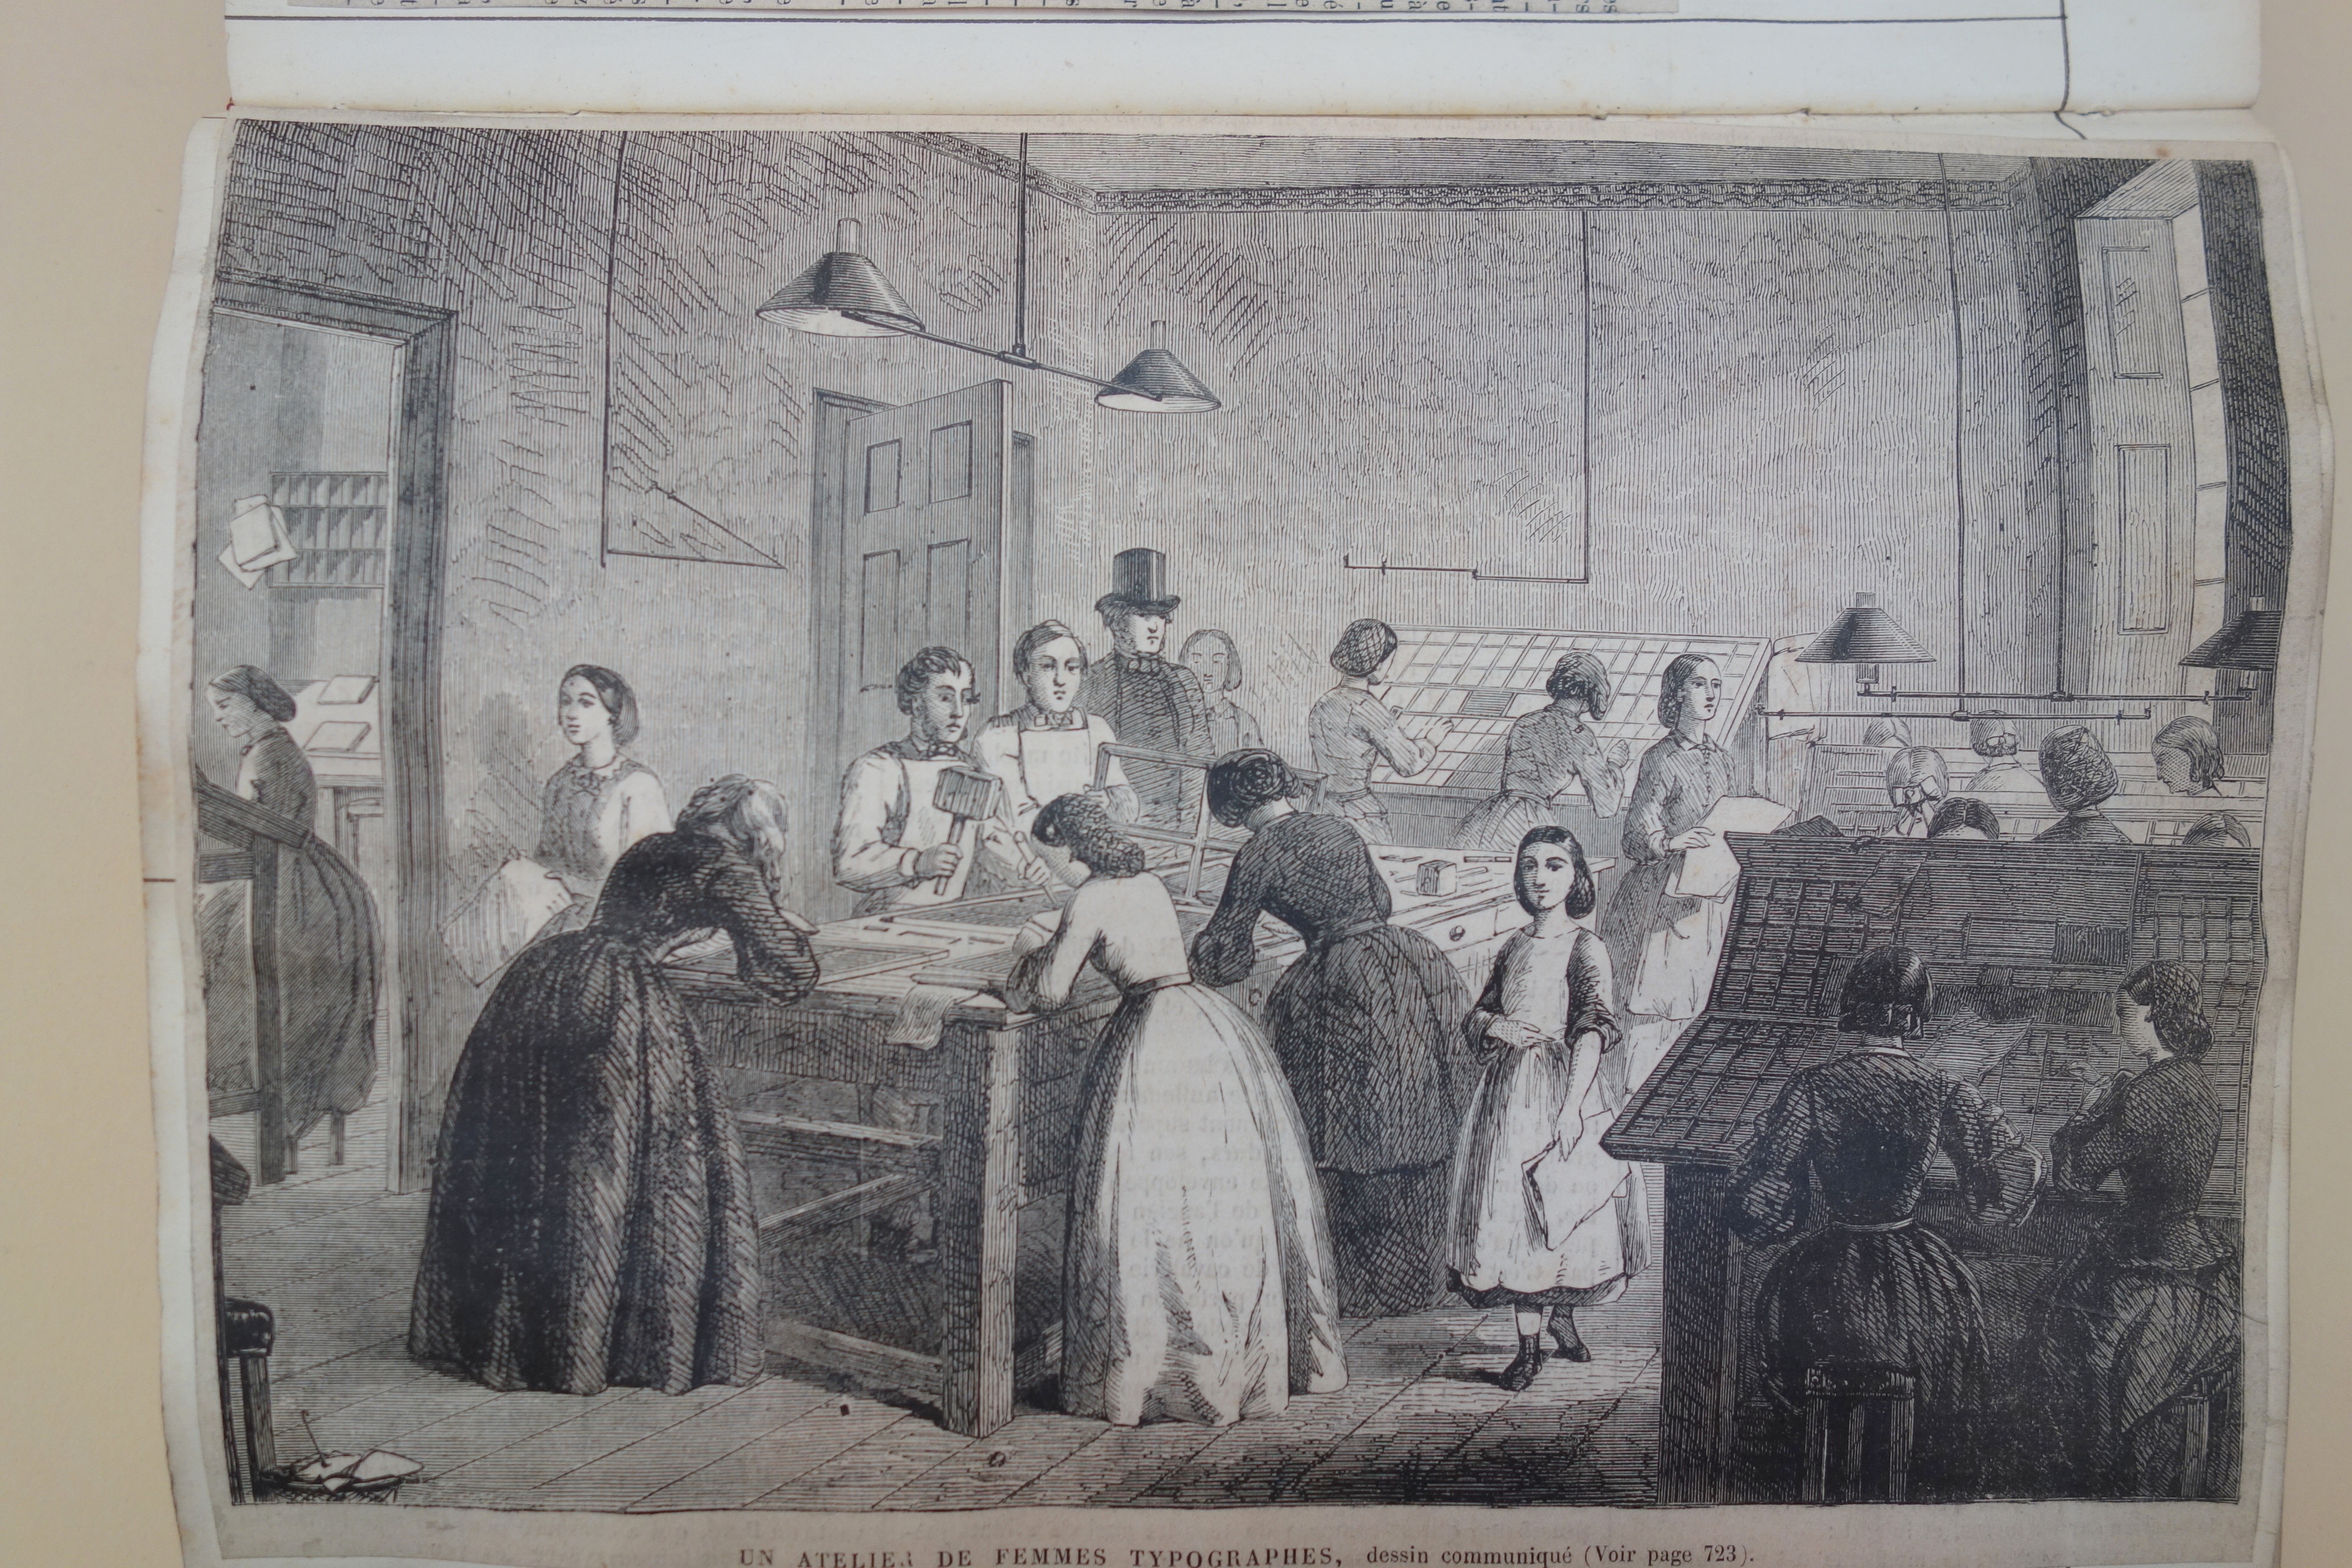 This image published in a French periodical was copied from the illustration of the Printing Office of the Victoria Press in London